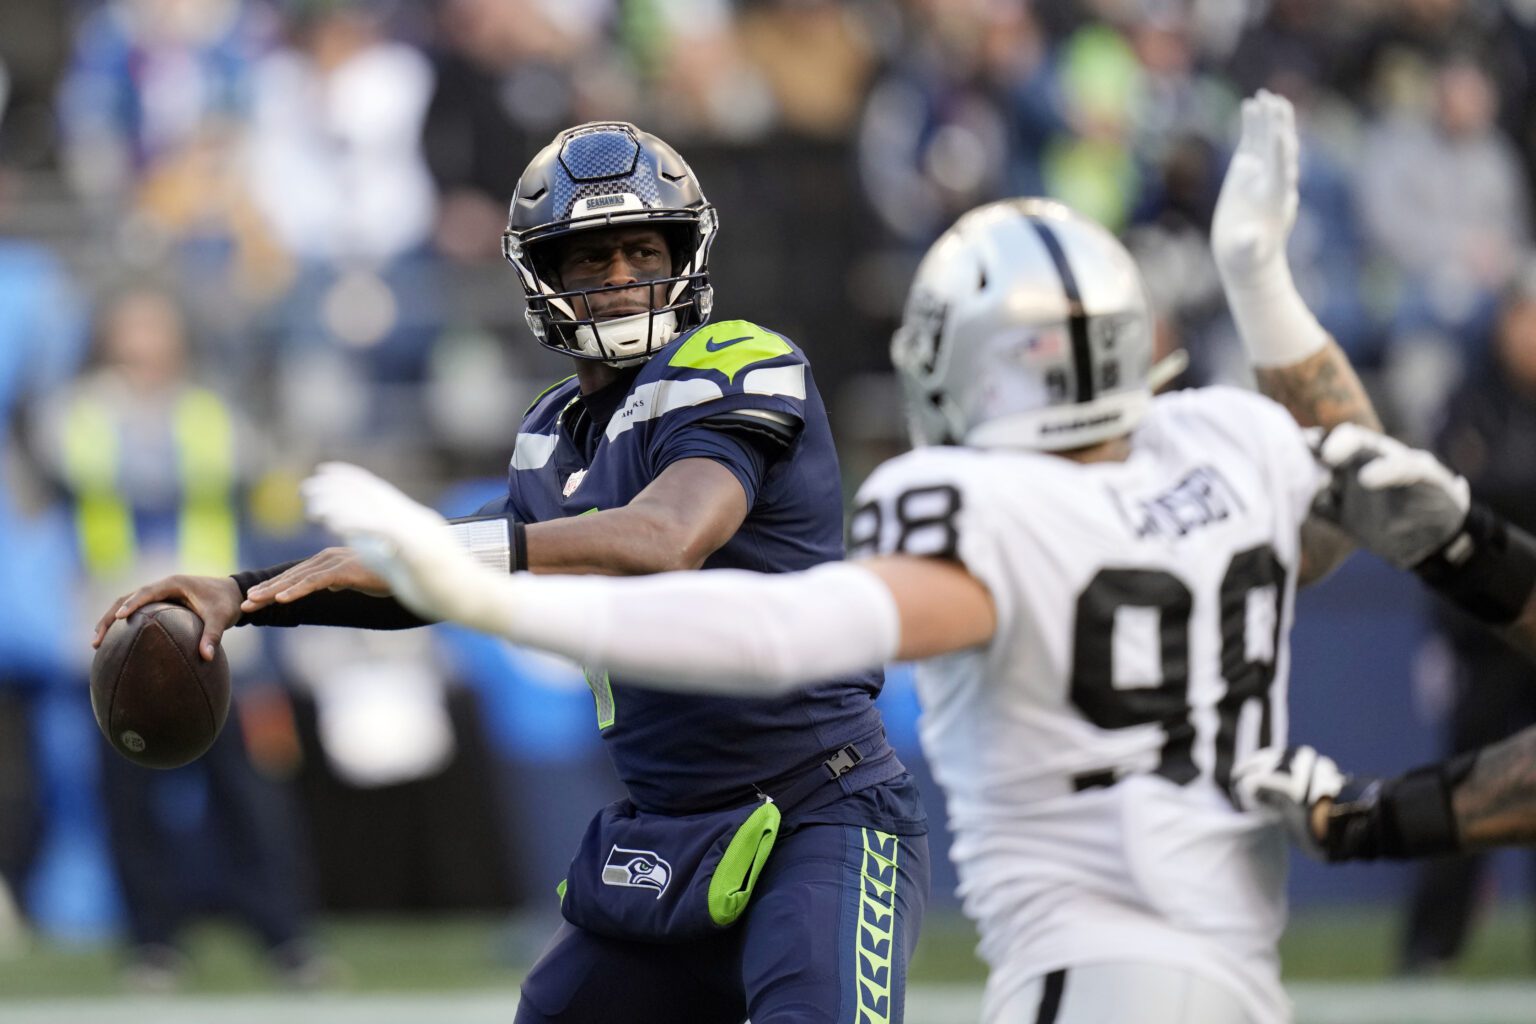 Seattle Seahawks quarterback Geno Smith throws against the Las Vegas Raiders during the second half of an NFL football game on Nov. 27 in Seattle.